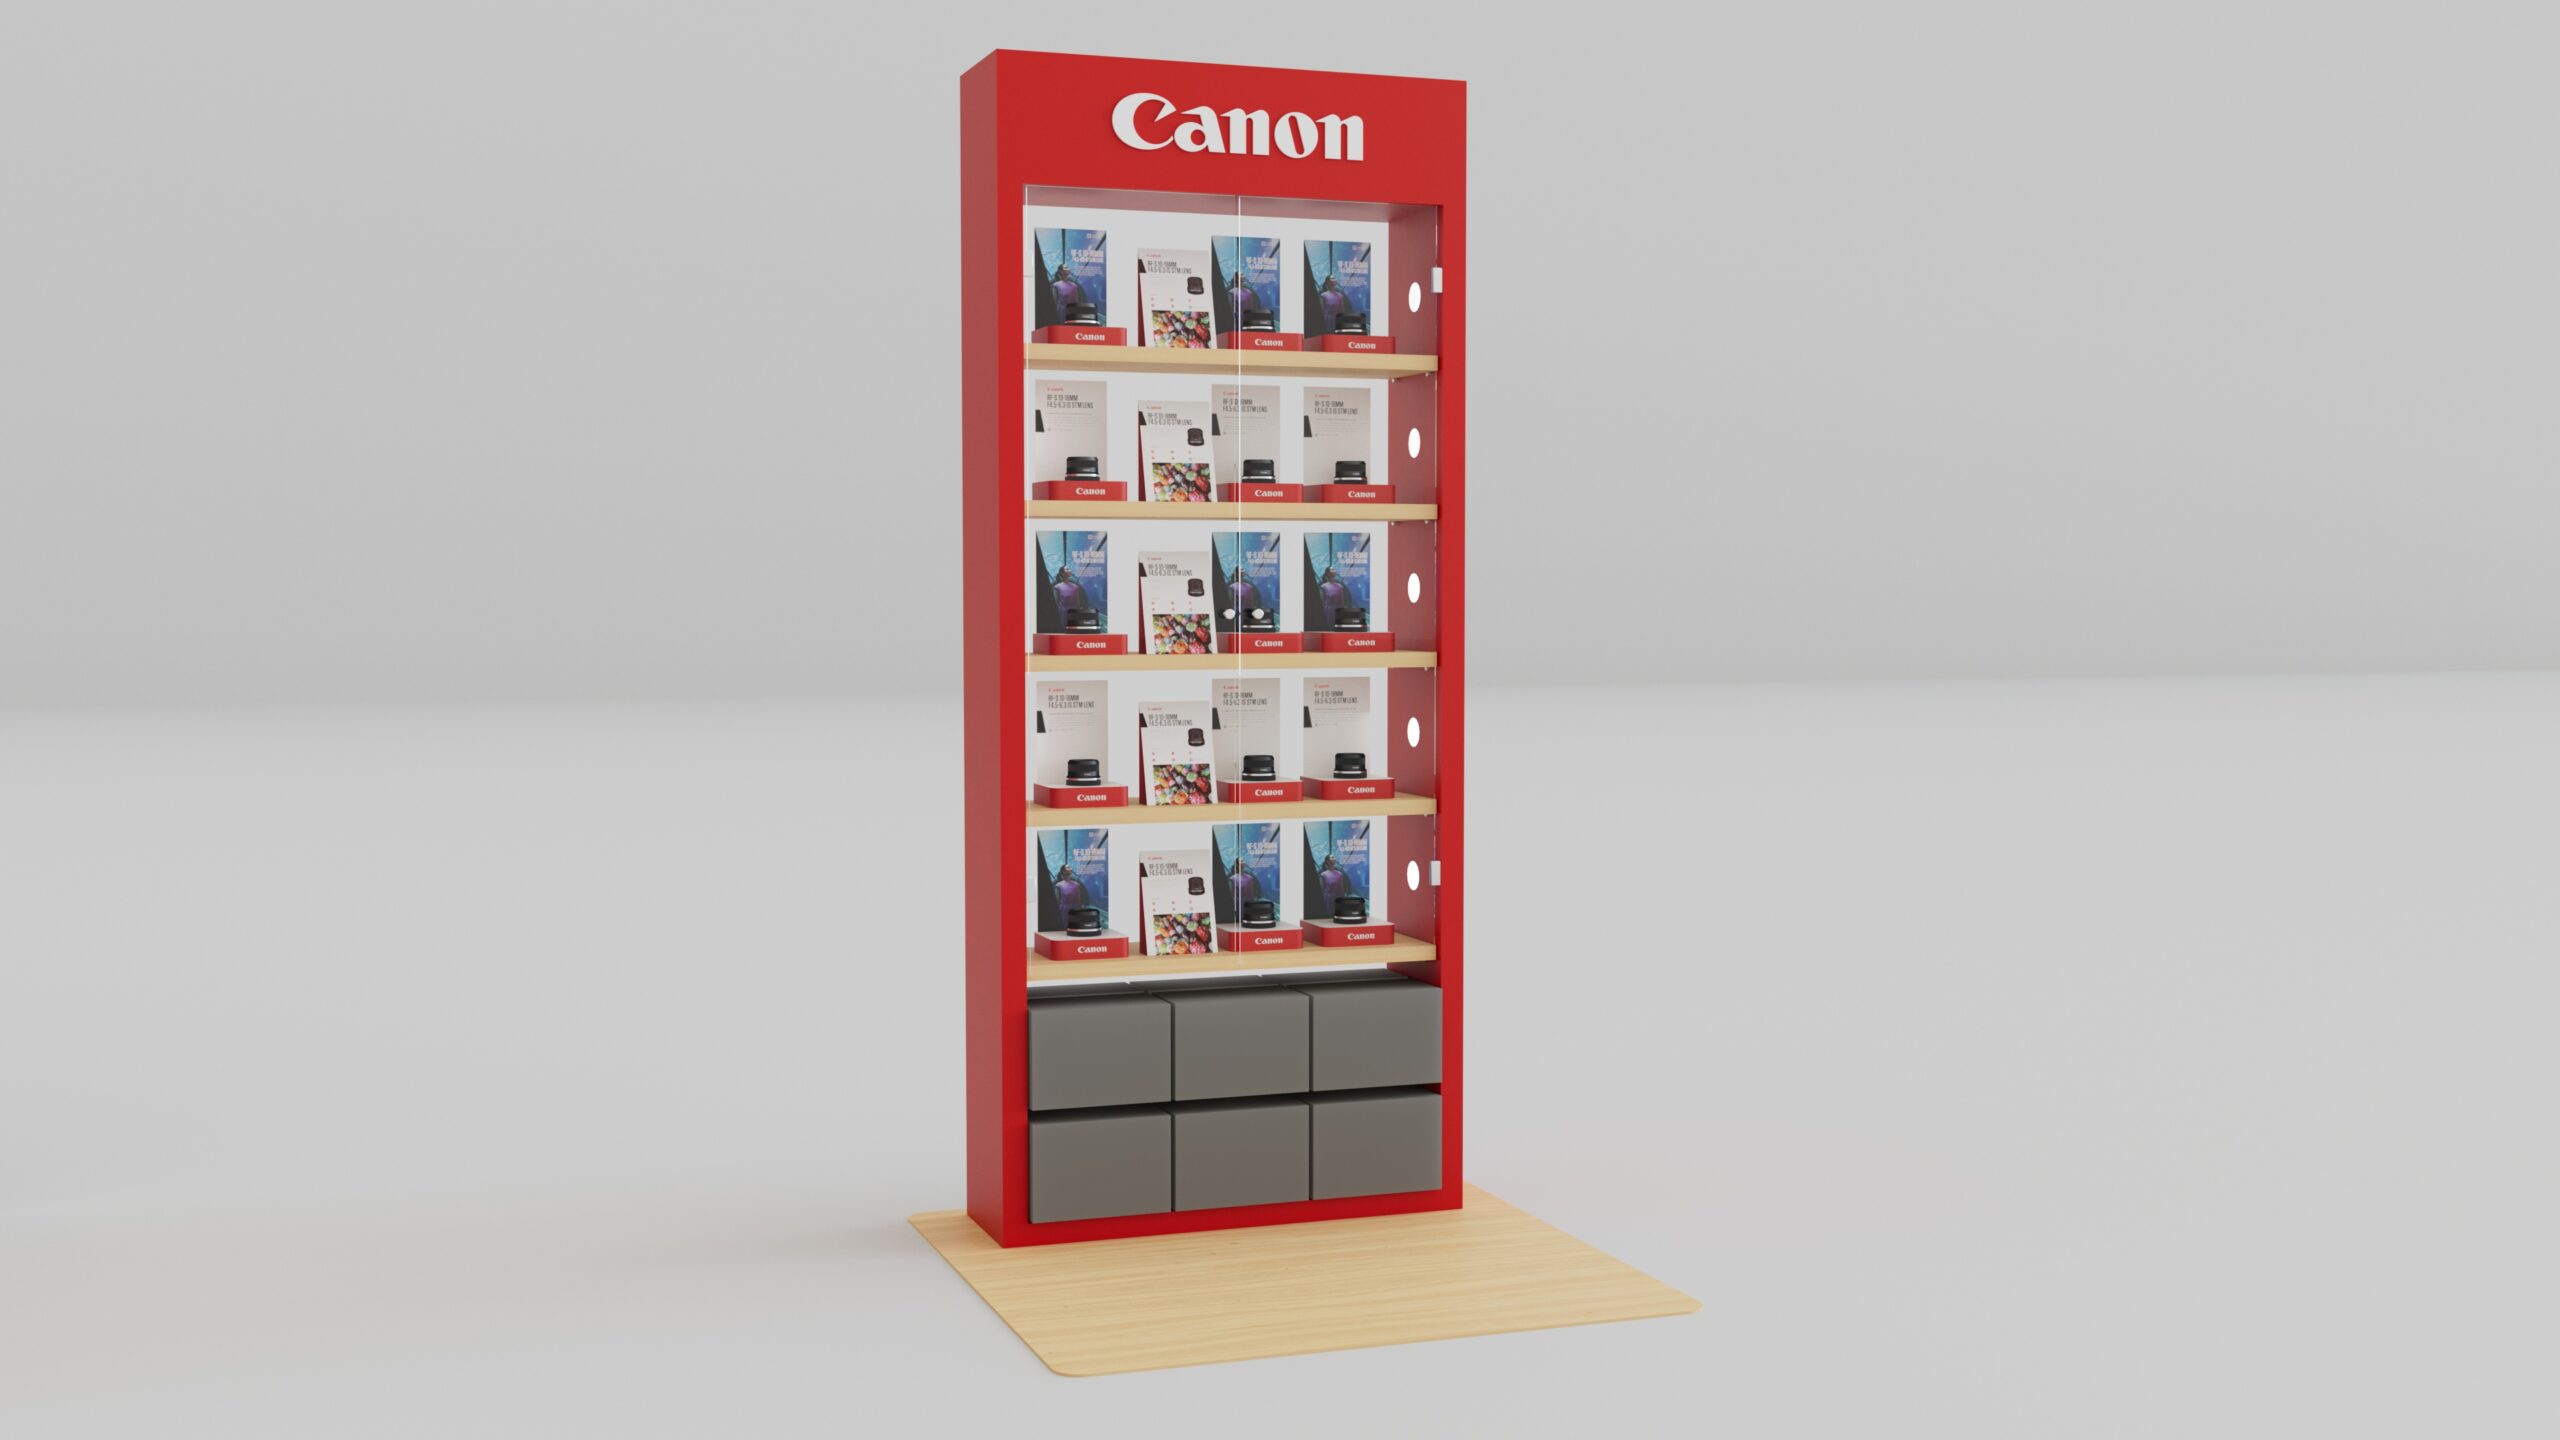 Canon_render_0503_Lens_Cabinet_ANGLED_—-MASS